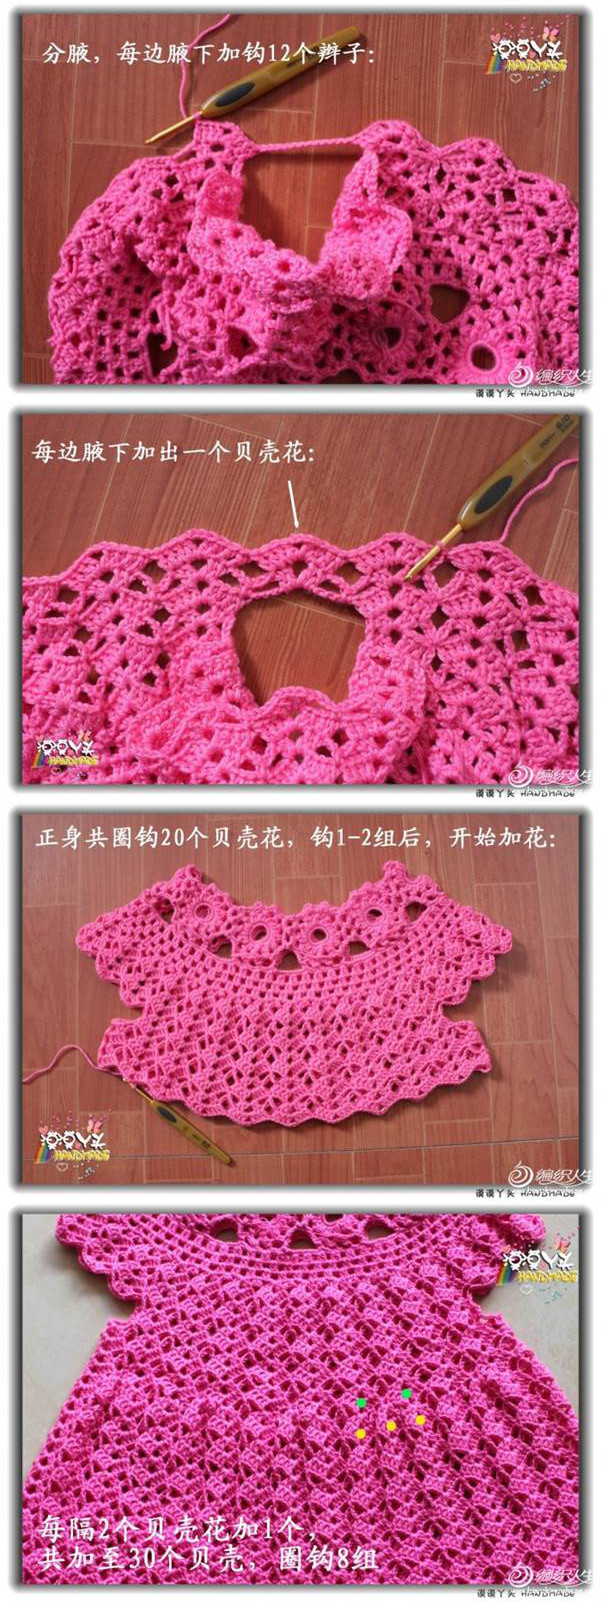 crochet dress tutorial for all ages 3